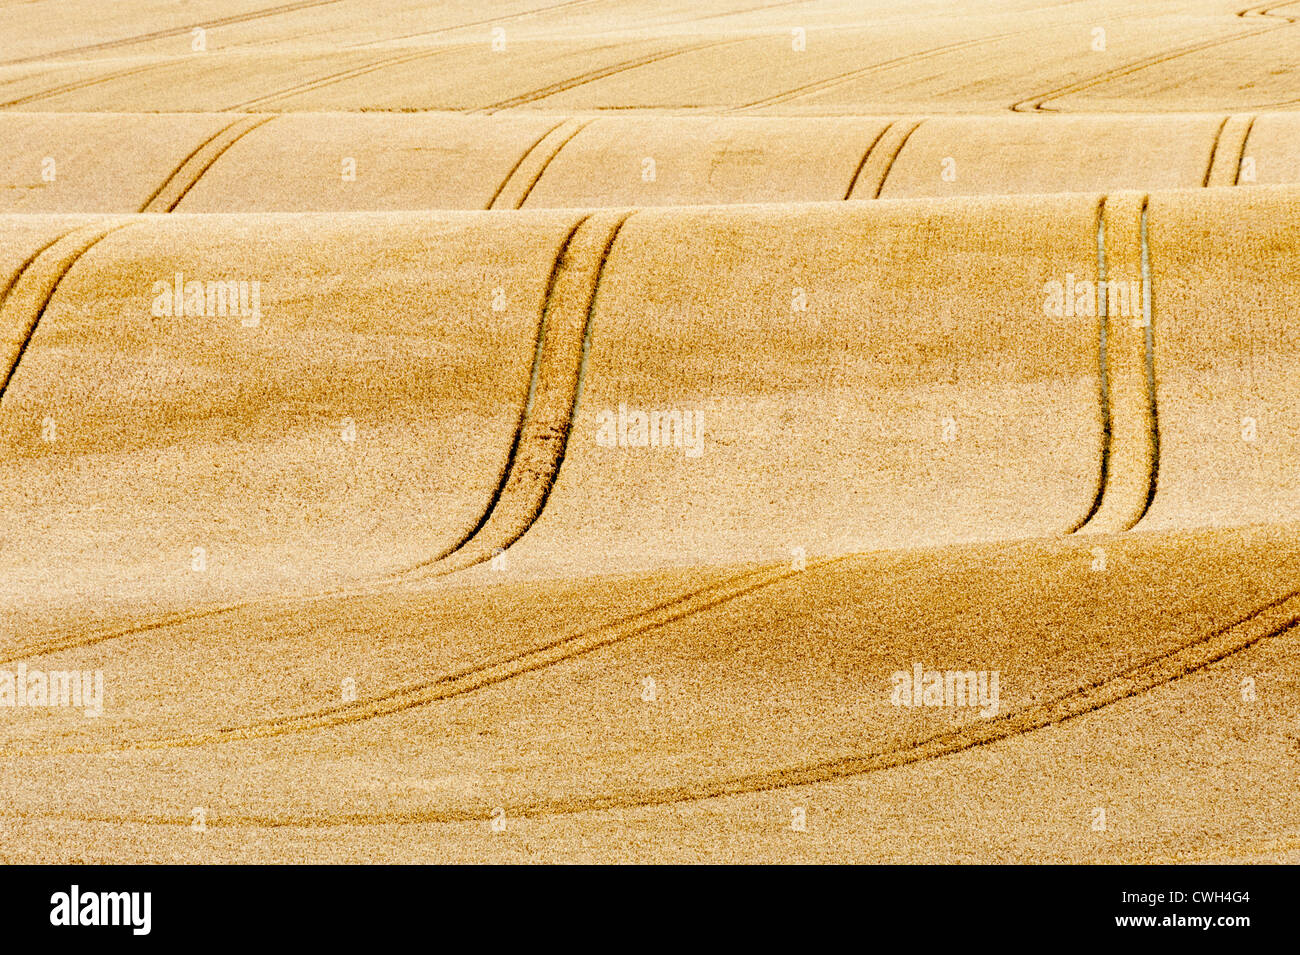 Rolling countryside in the UK with golden wheat just before harvest, showing tramlines for agricultural machinery Stock Photo